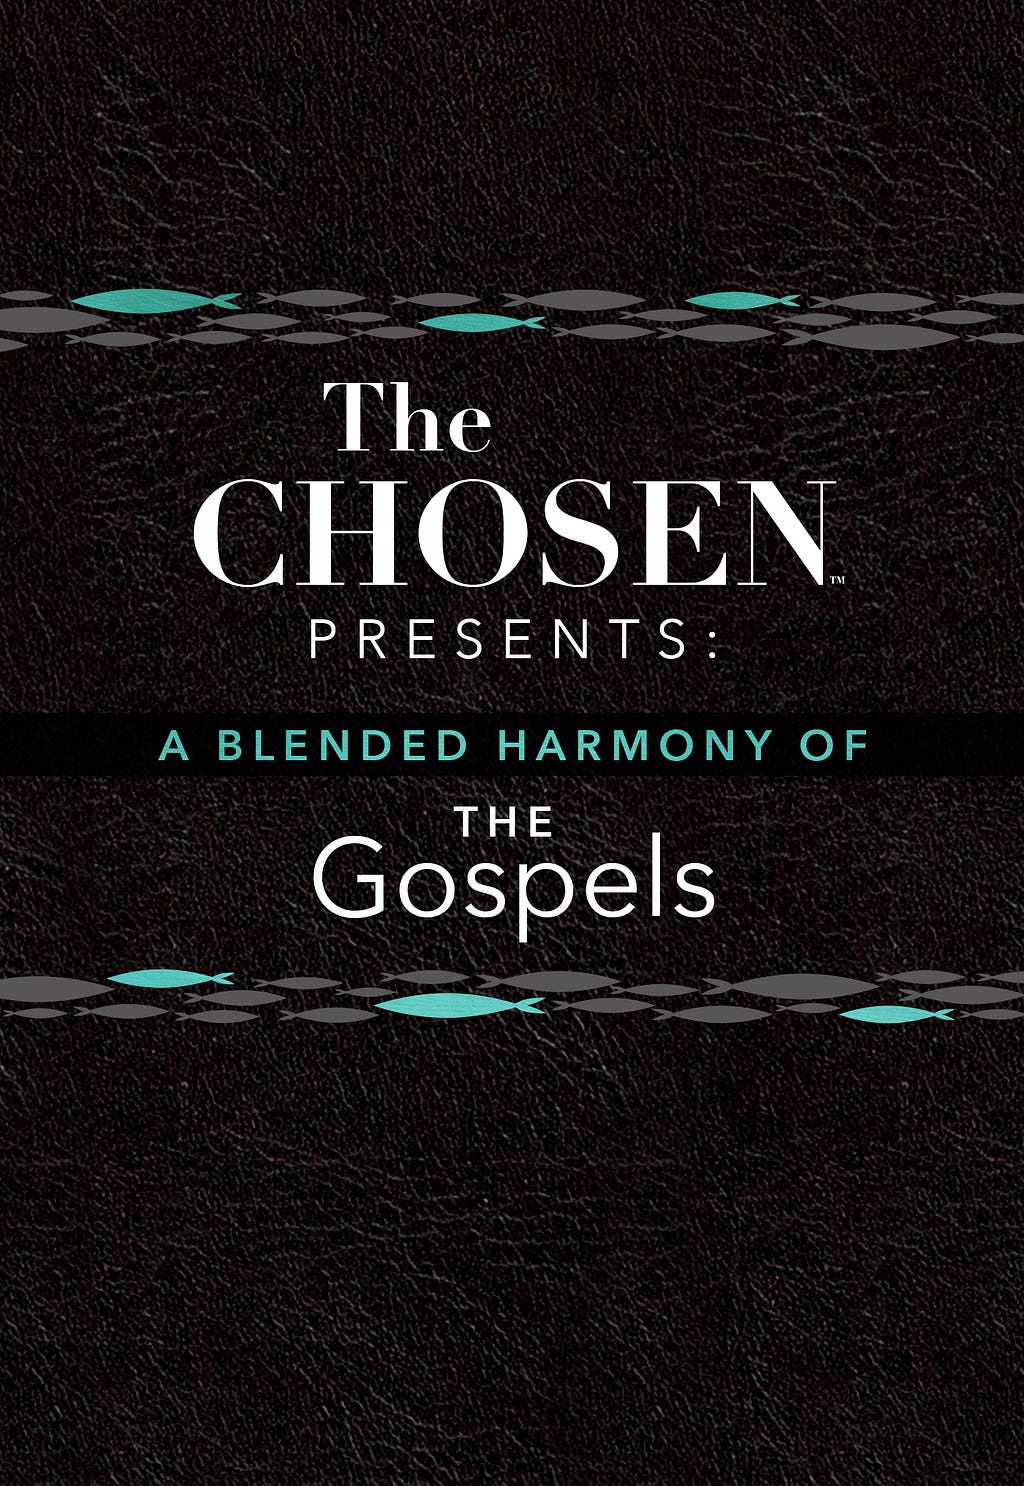 [PDF] The Chosen Presents: A Blended Harmony of the Gospels By Steve Laube